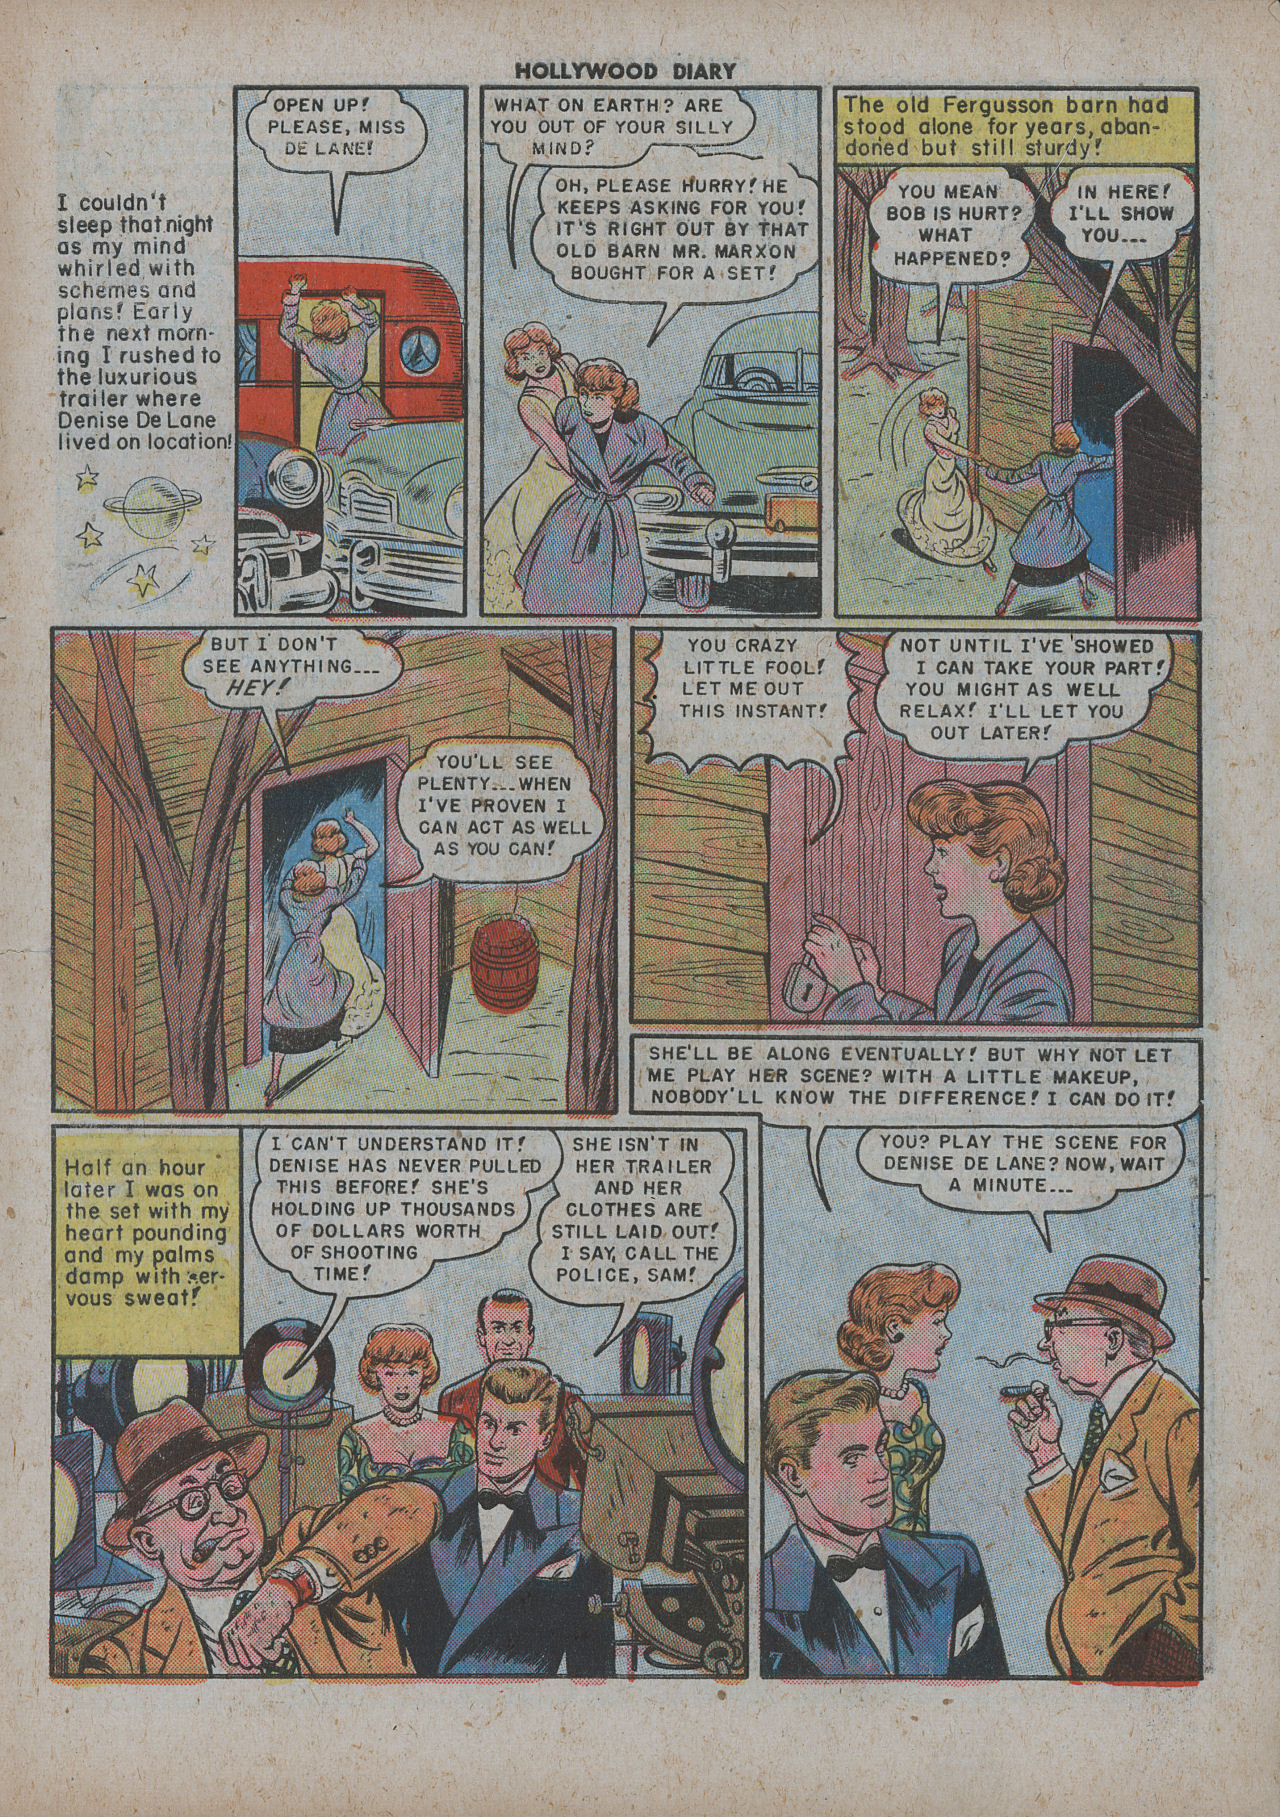 Read online Hollywood Diary comic -  Issue #3 - 9